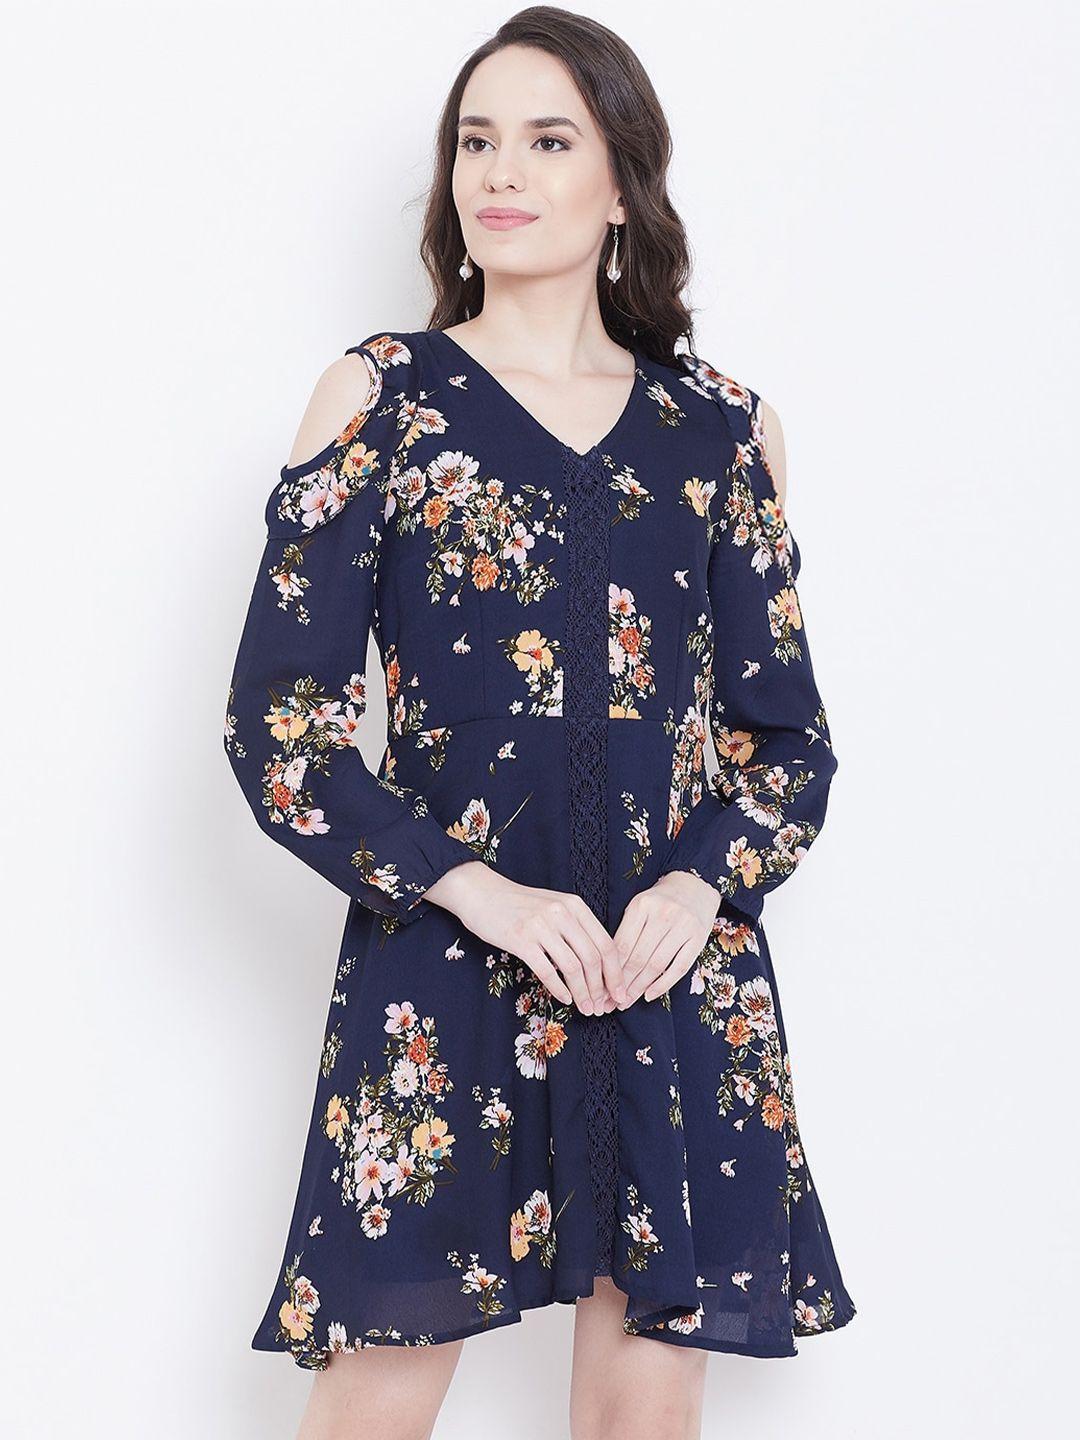 dodo & moa printed floral v-neck fit and flare dress